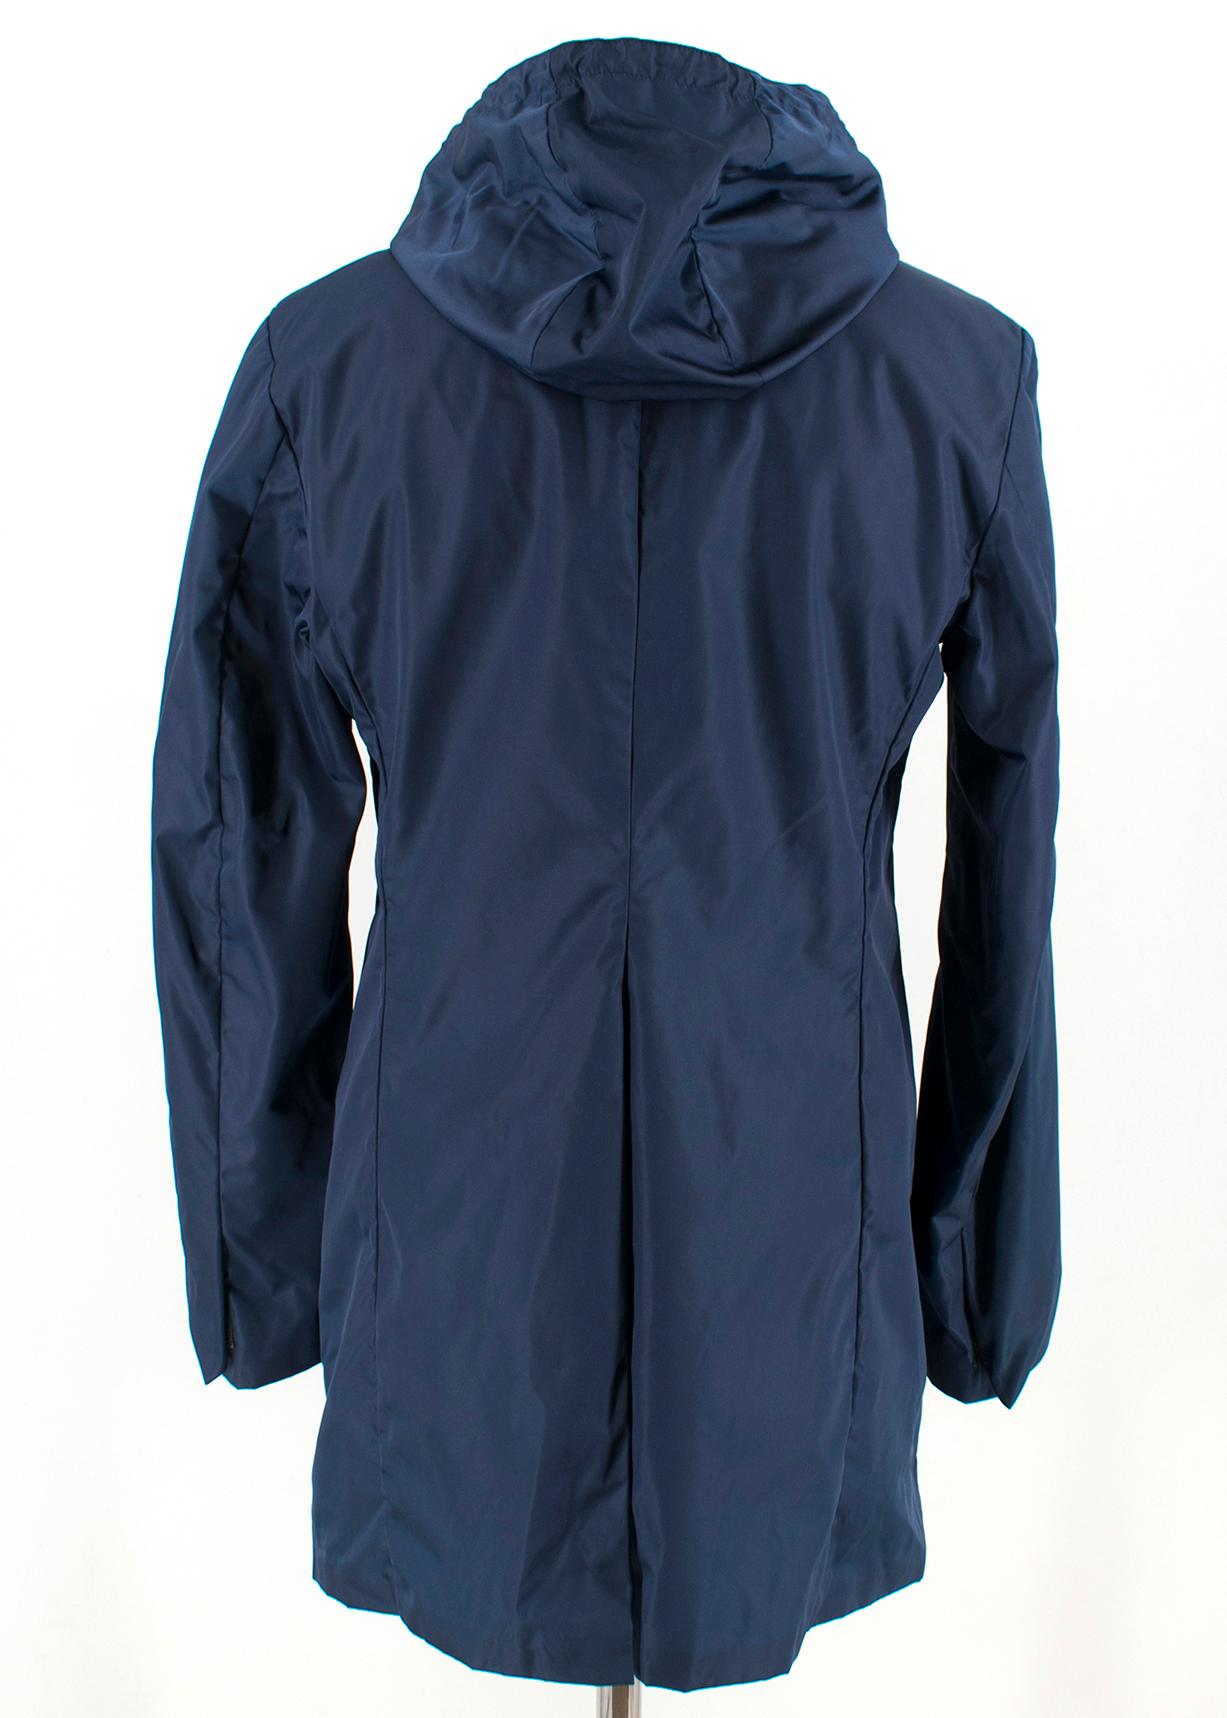 Prada Navy Blue Nylon Water-Proof Jacket M  In Excellent Condition For Sale In London, GB